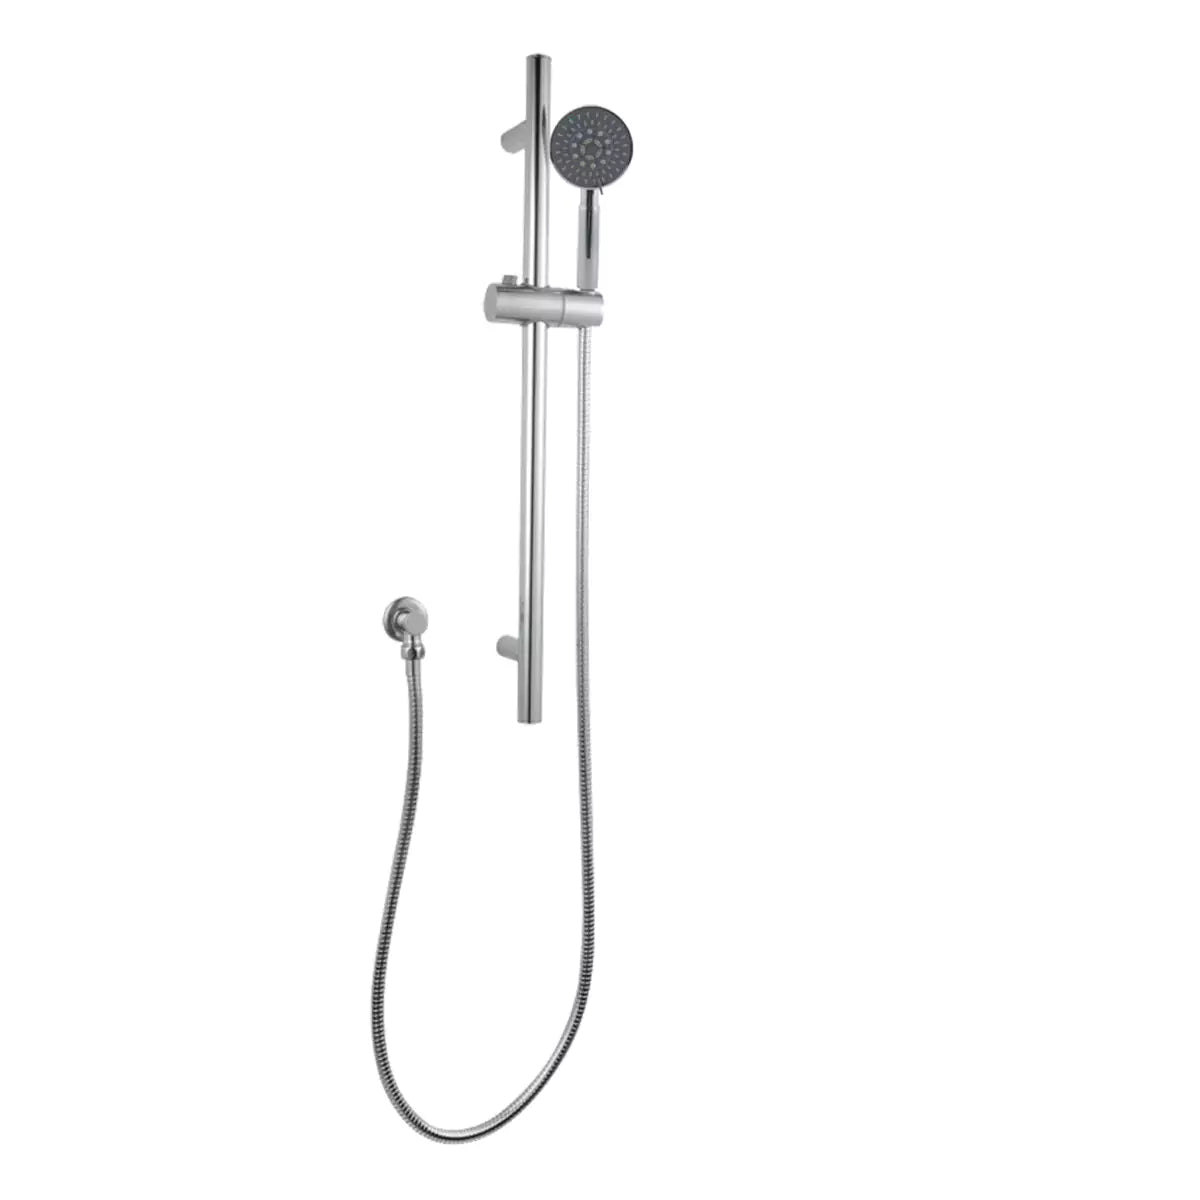 Round Chrome Hand-Held Shower Set with Rail, Stylish and Functional-Chrome-CH2147-1-SH-N+CH-R4-HHS